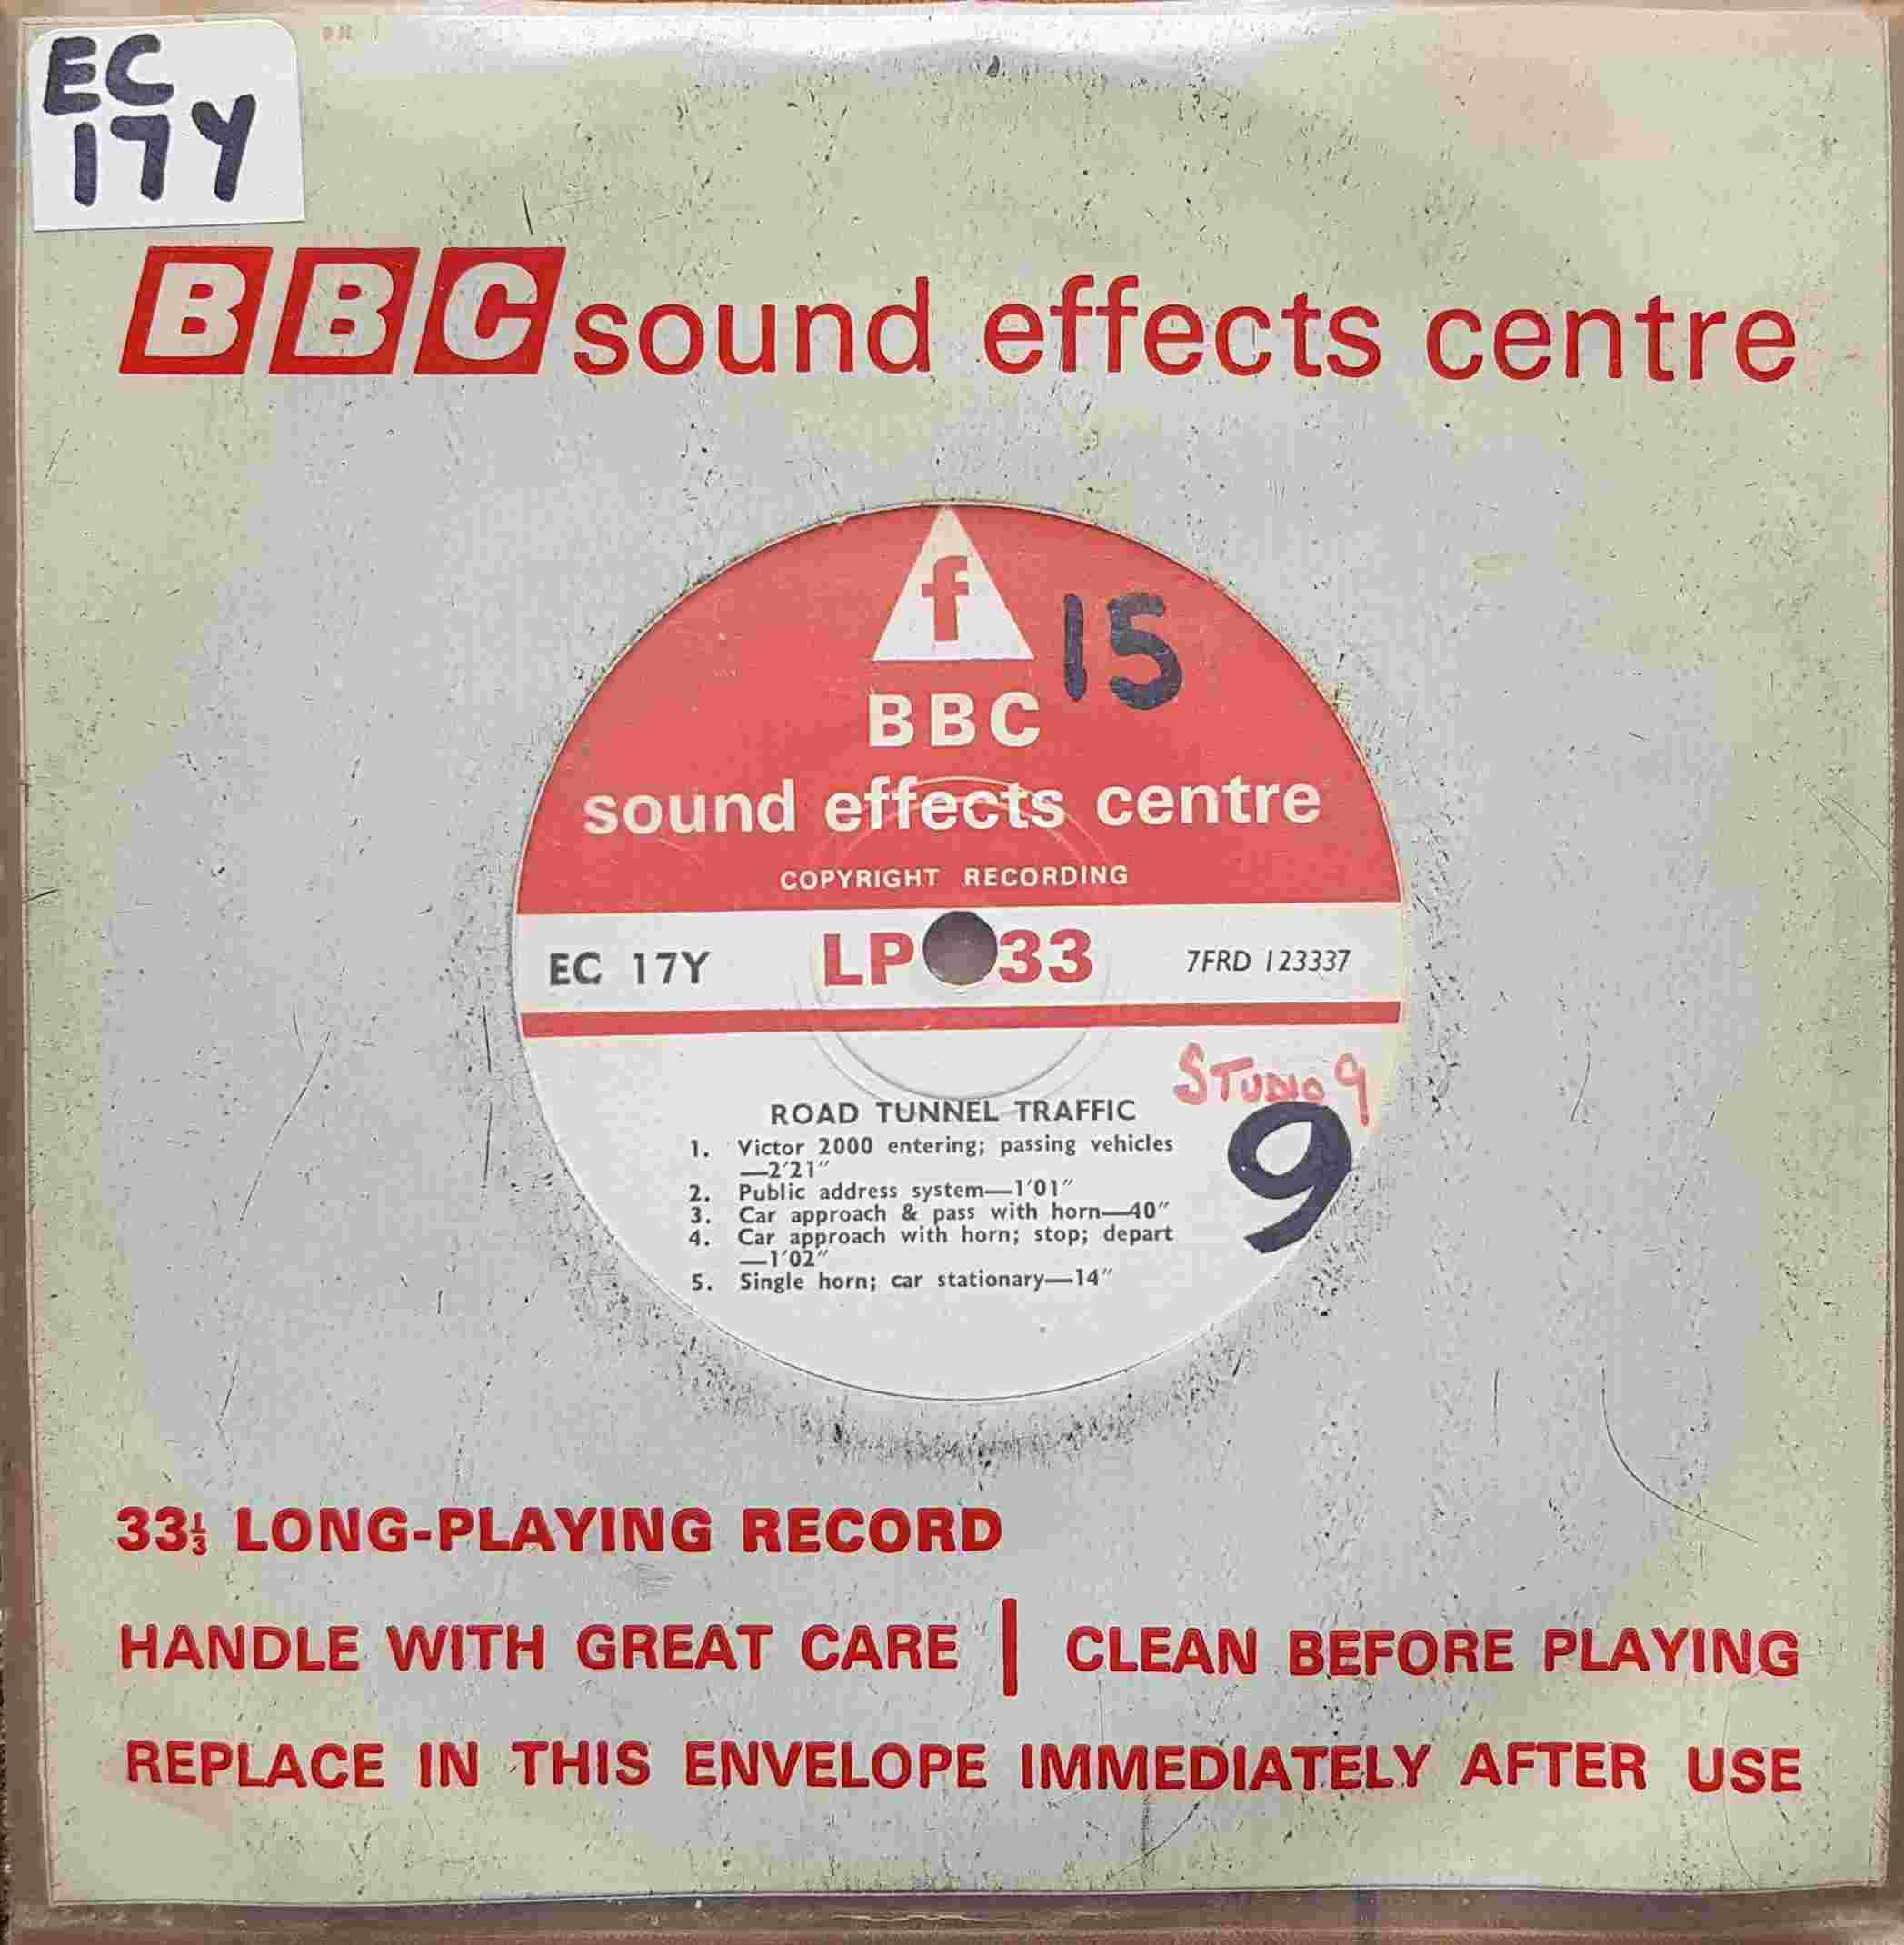 Picture of EC 17Y Road tunnel traffic by artist Not registered from the BBC singles - Records and Tapes library